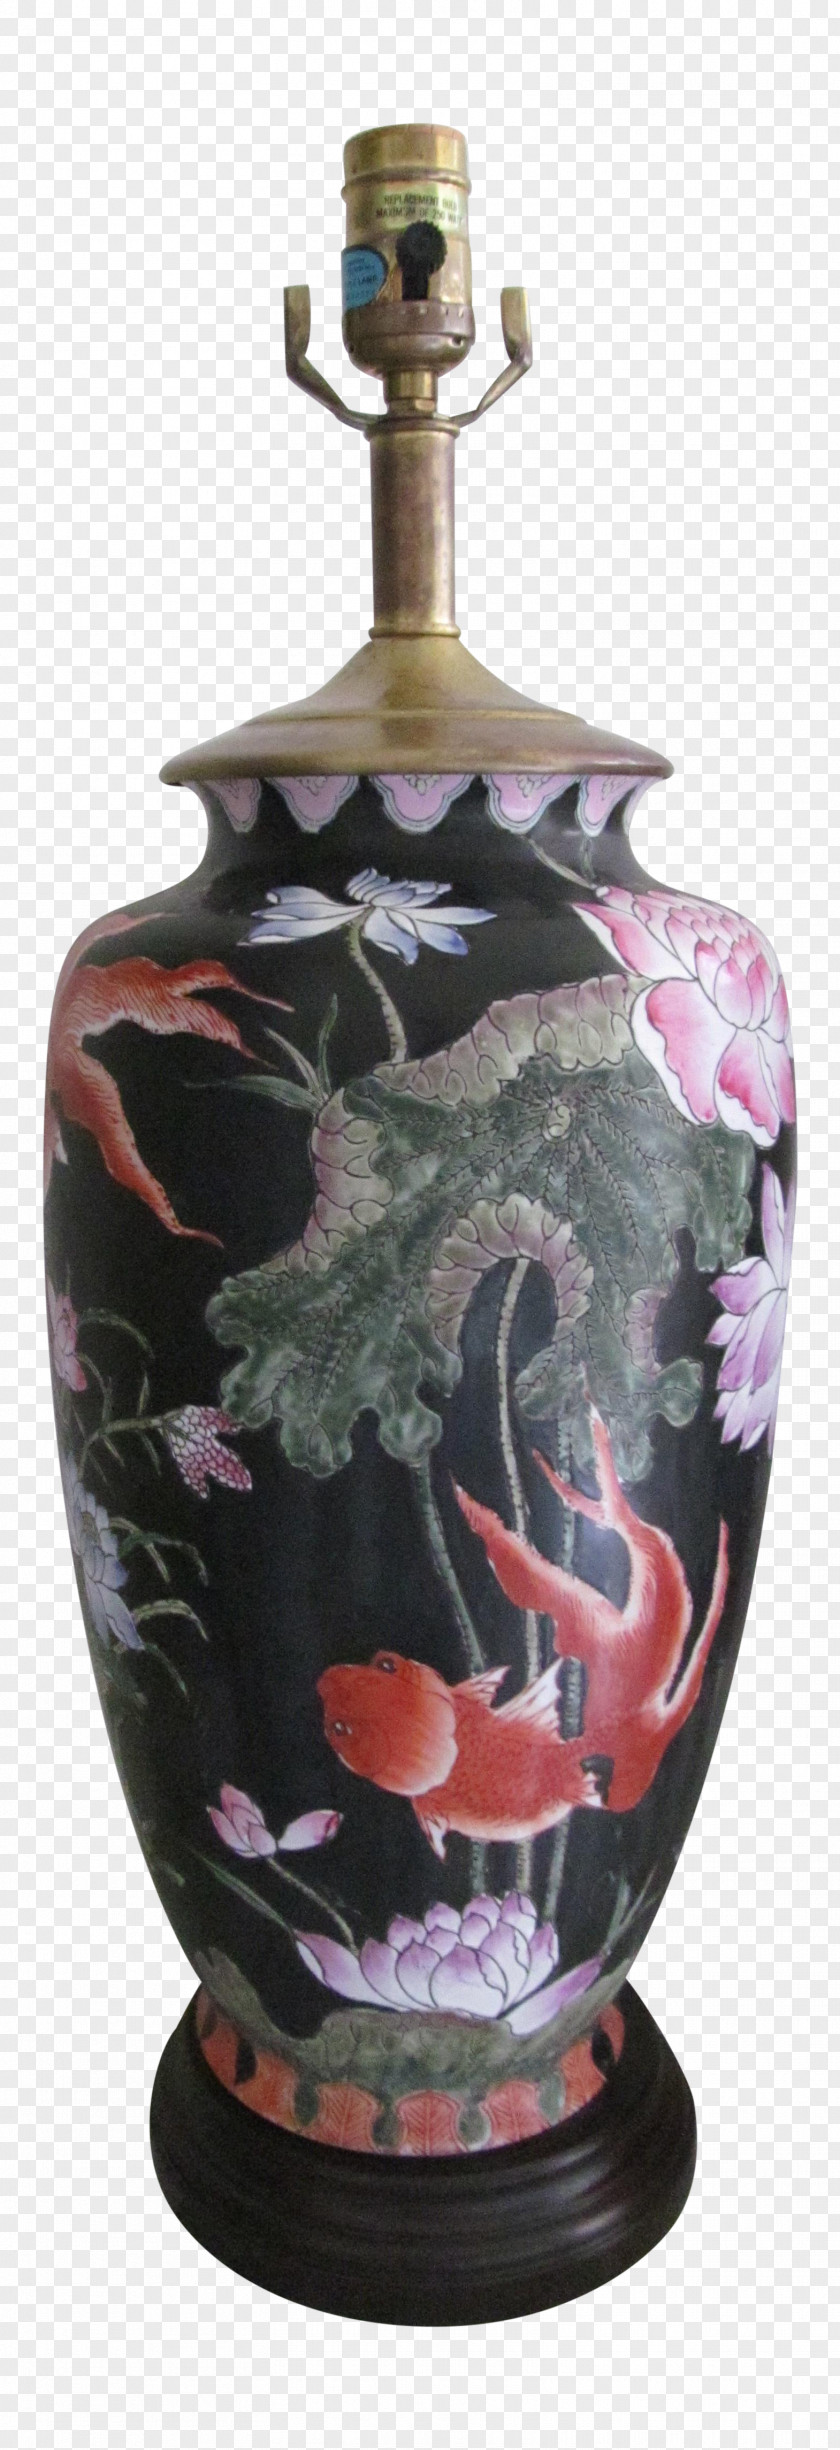 Hand-painted Lamp Vase Milk Glass Famille Noire Furniture PNG